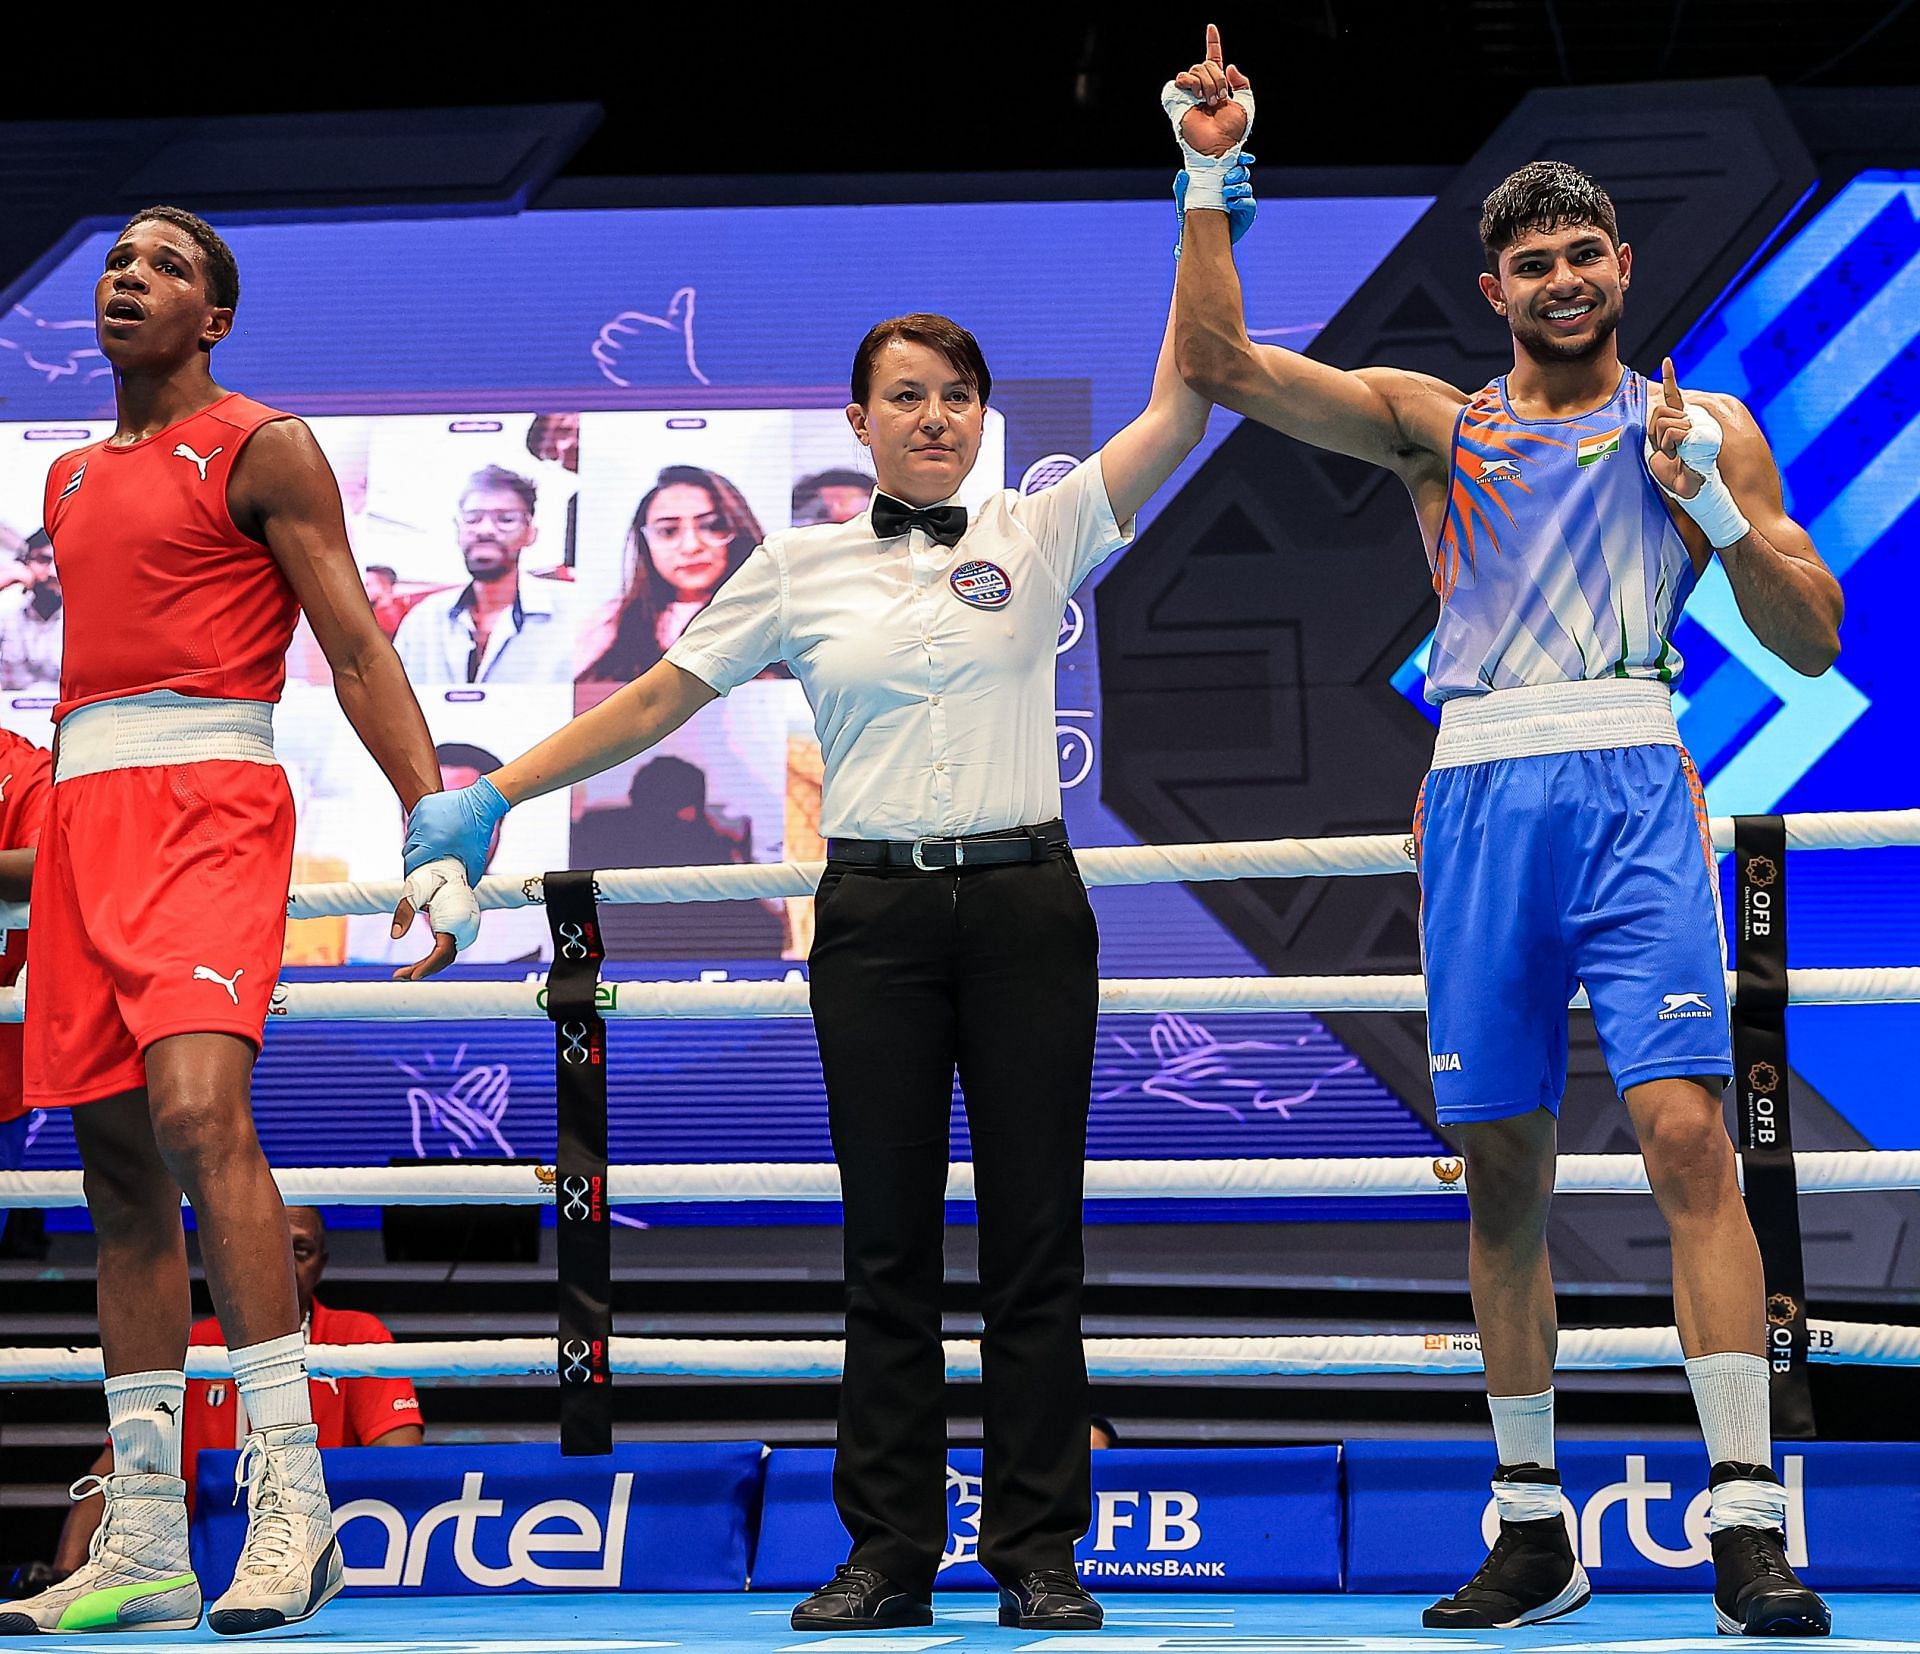 Nishant Dev after winning his quarterfinal bout at the 2023 World Boxing Championship.